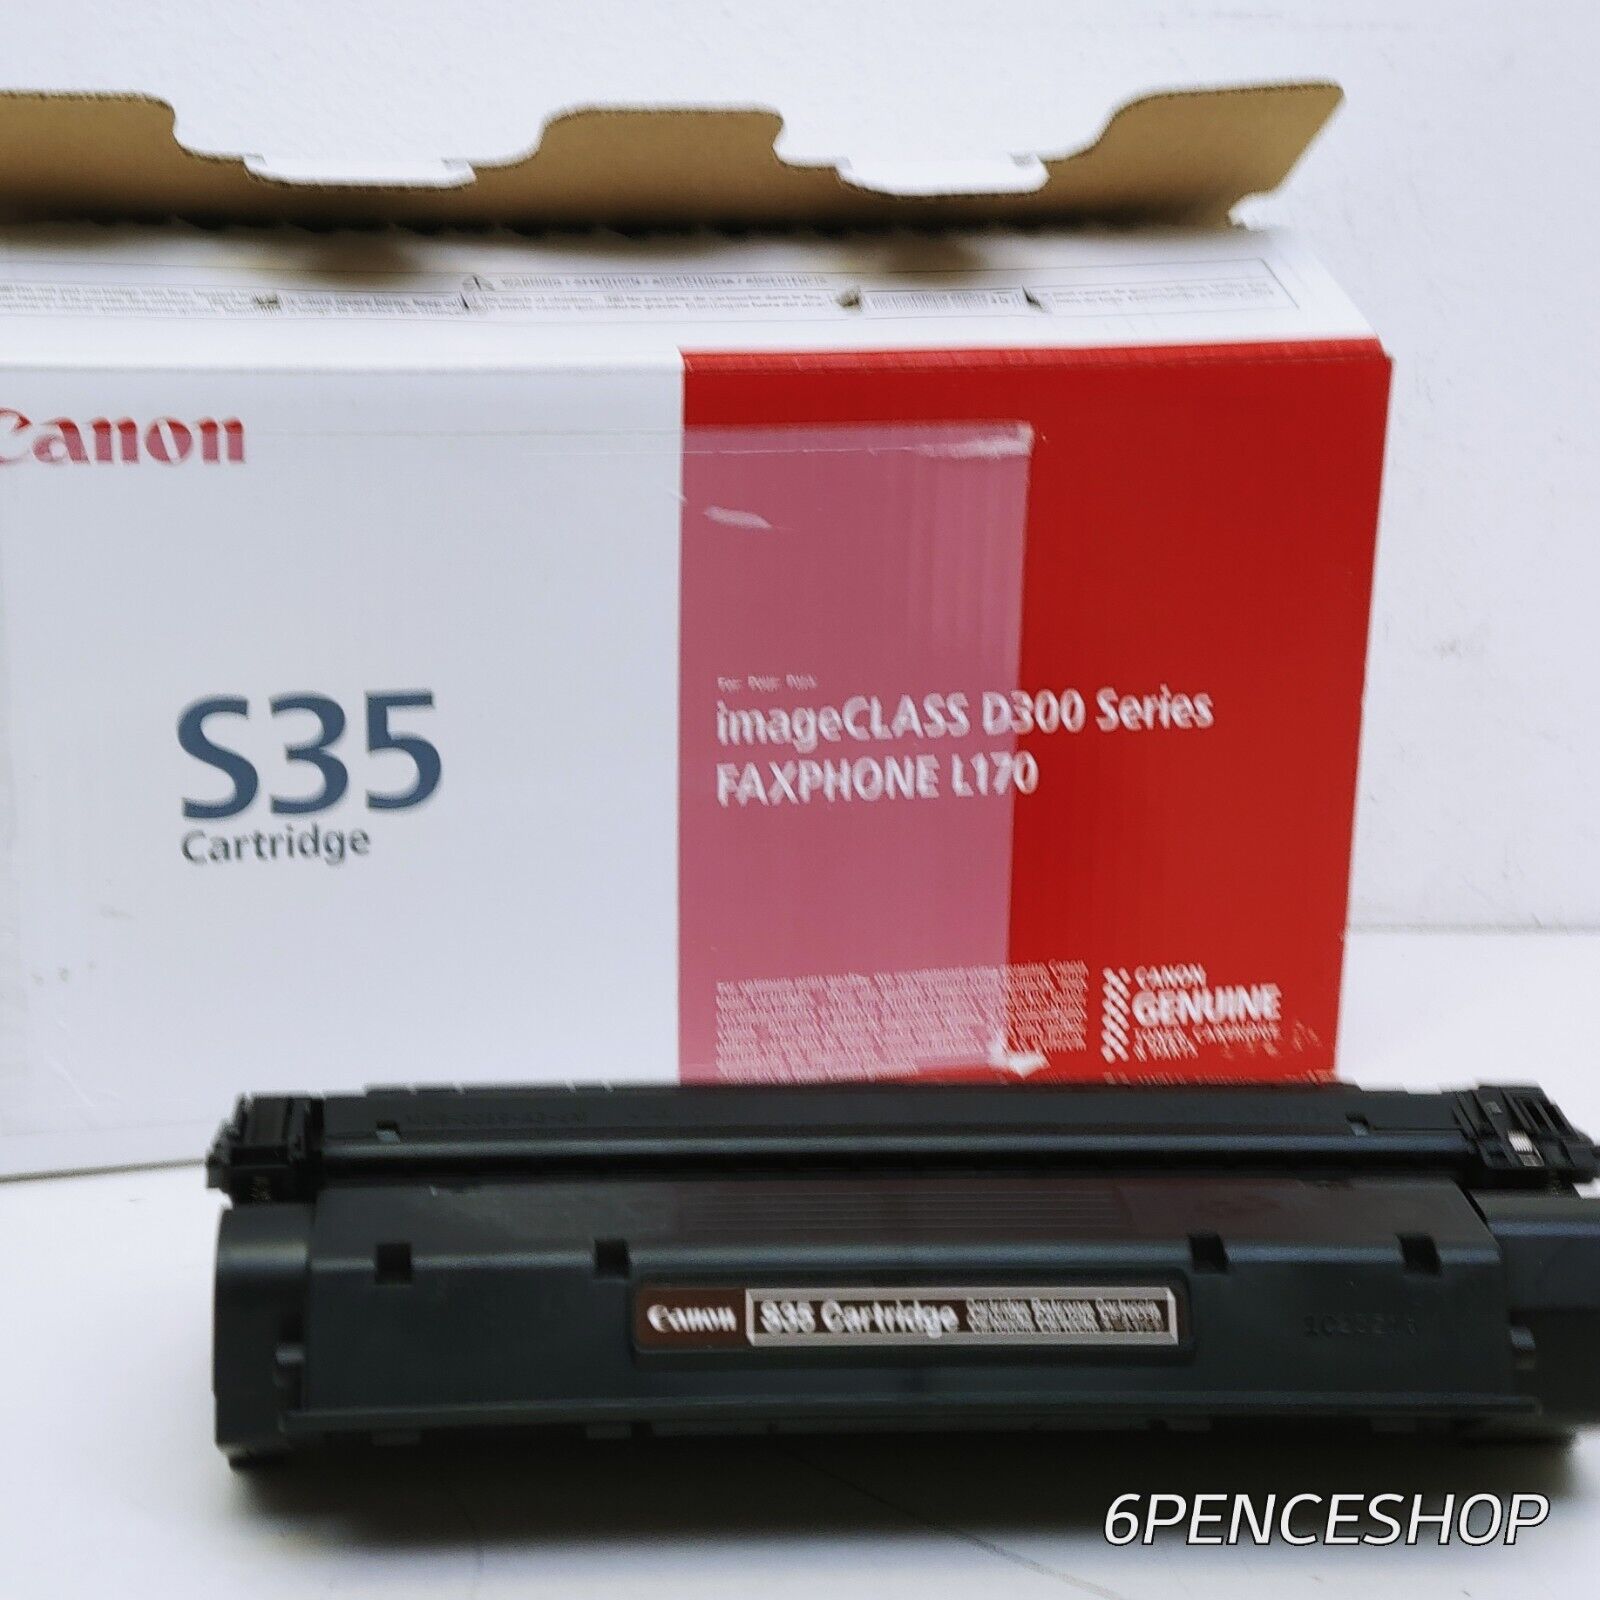 OB *Components are Clean* Canon S35 Cartridge For imageClass D300 Series 4